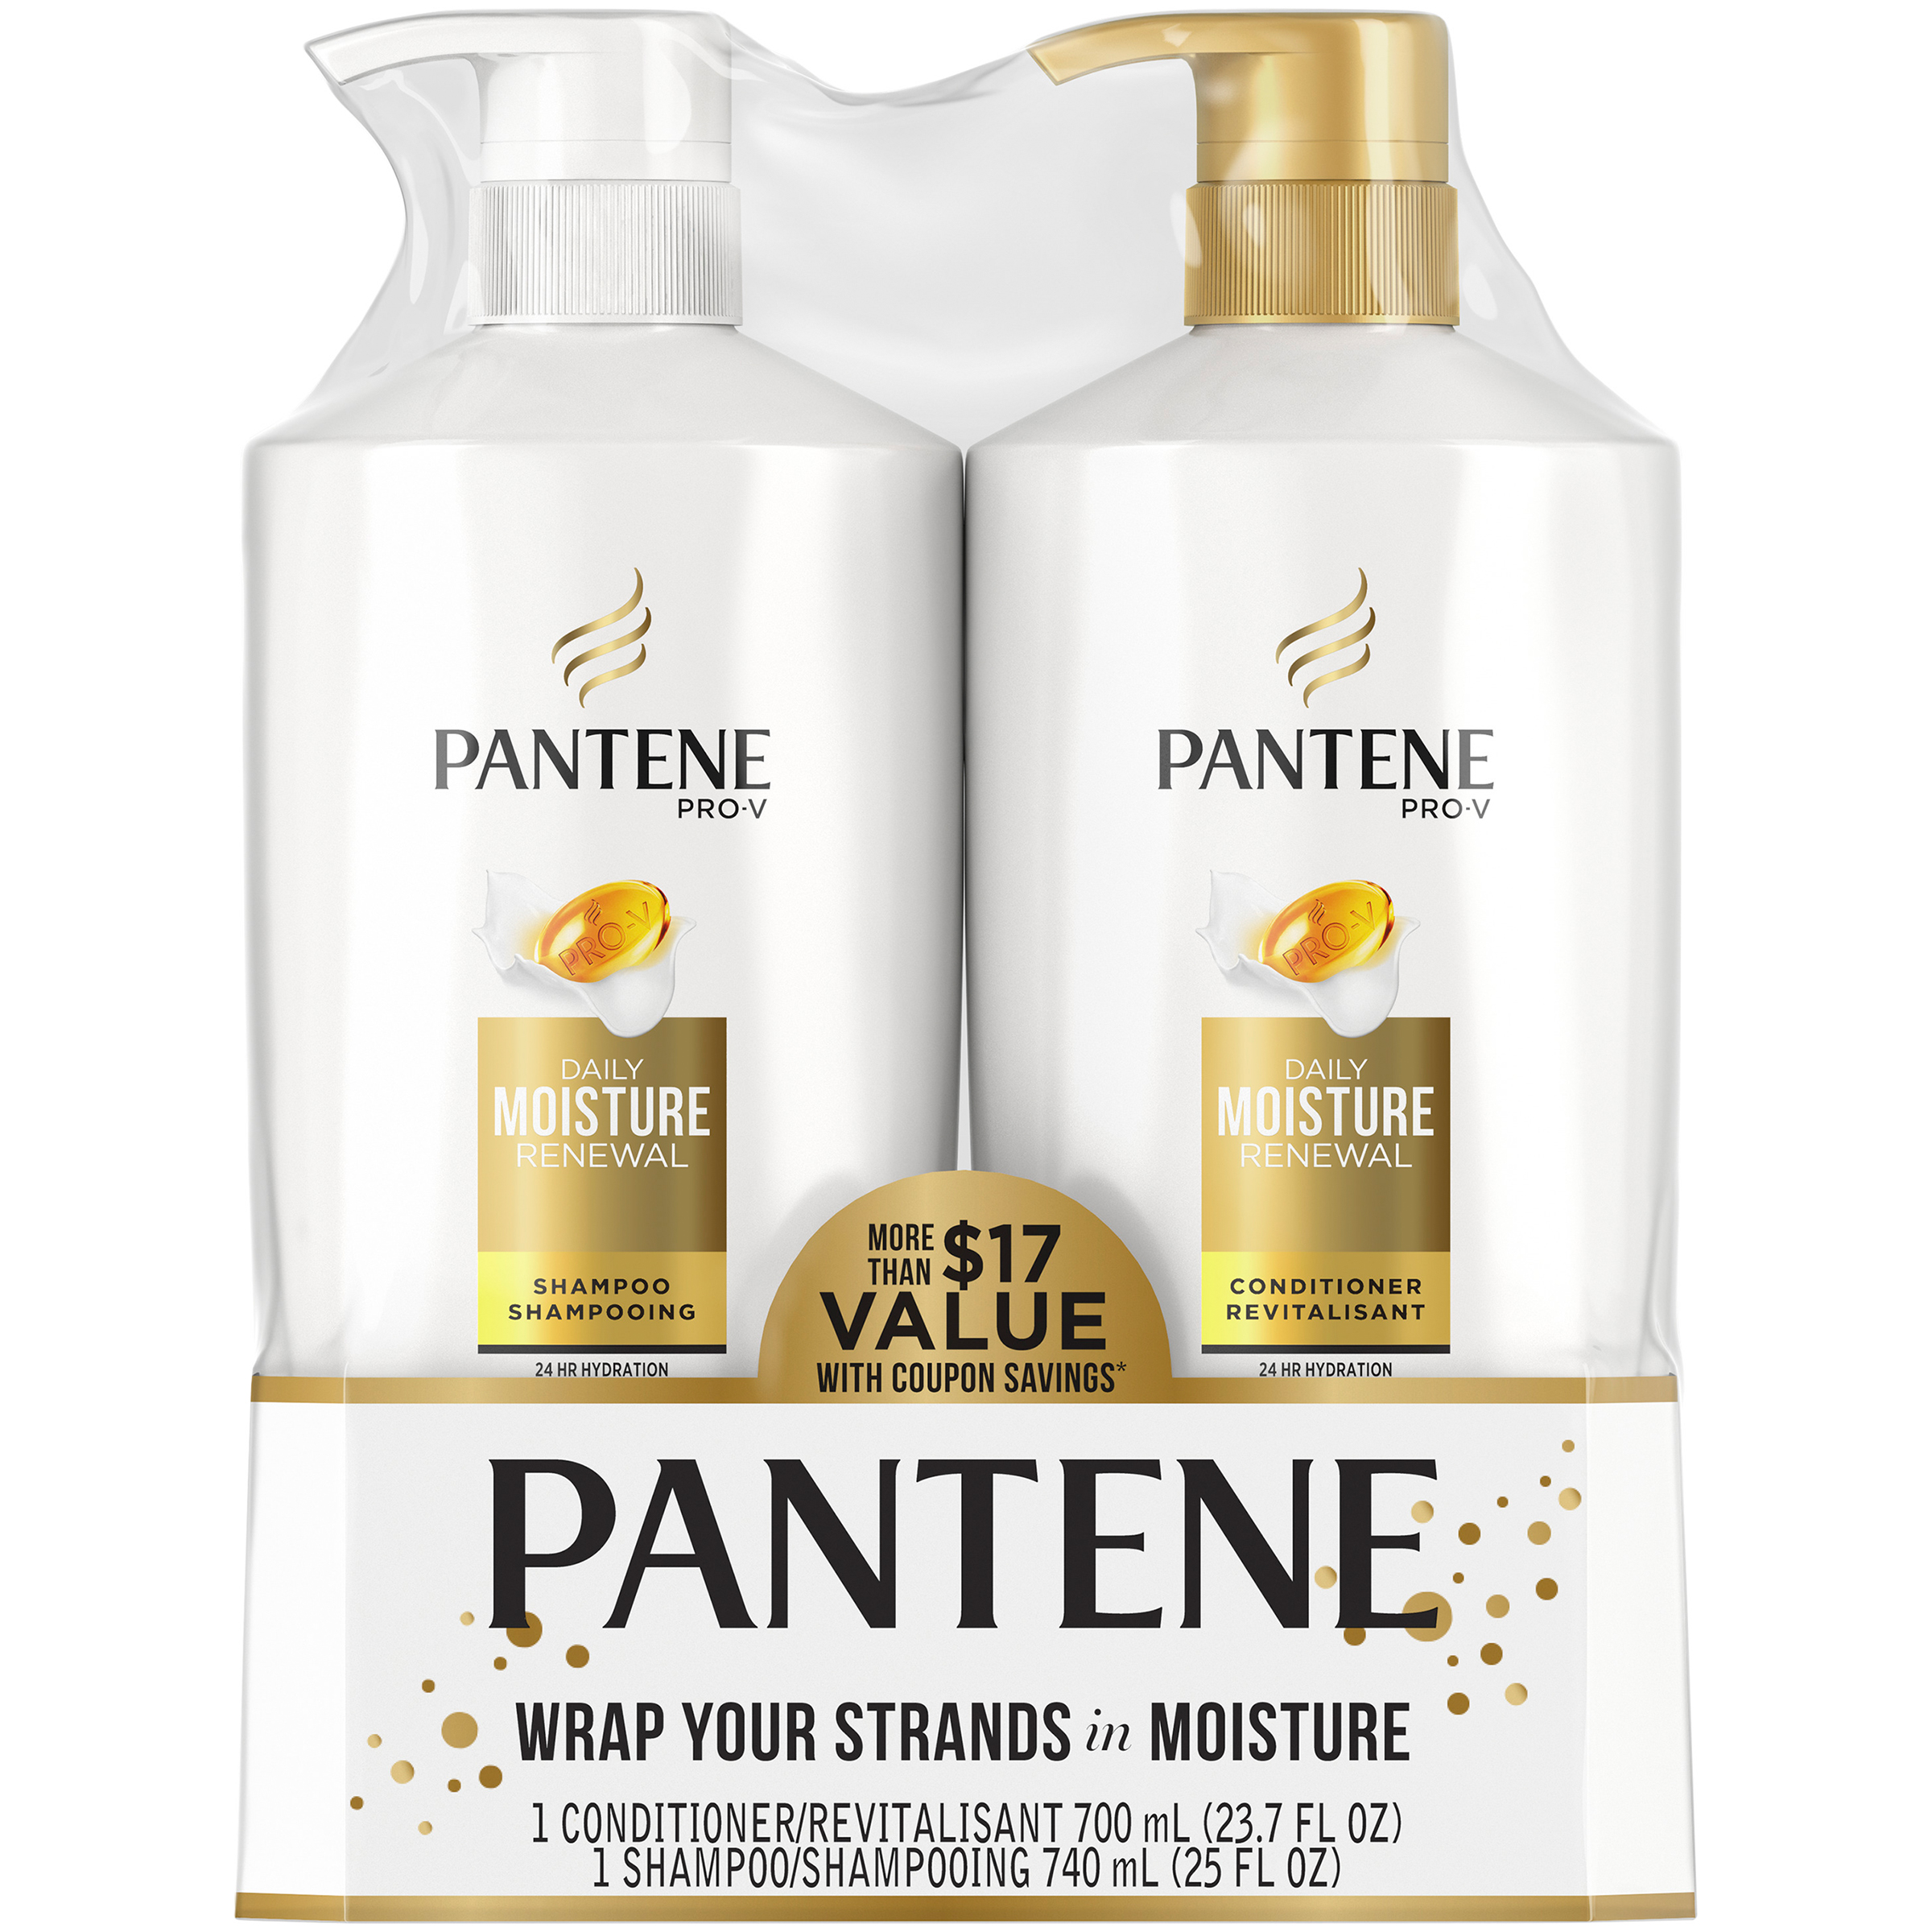 Pantene Pro-V Daily Moisture Renewal Shampoo and Conditioner Dual Pack, 48.7 fl oz - image 1 of 6